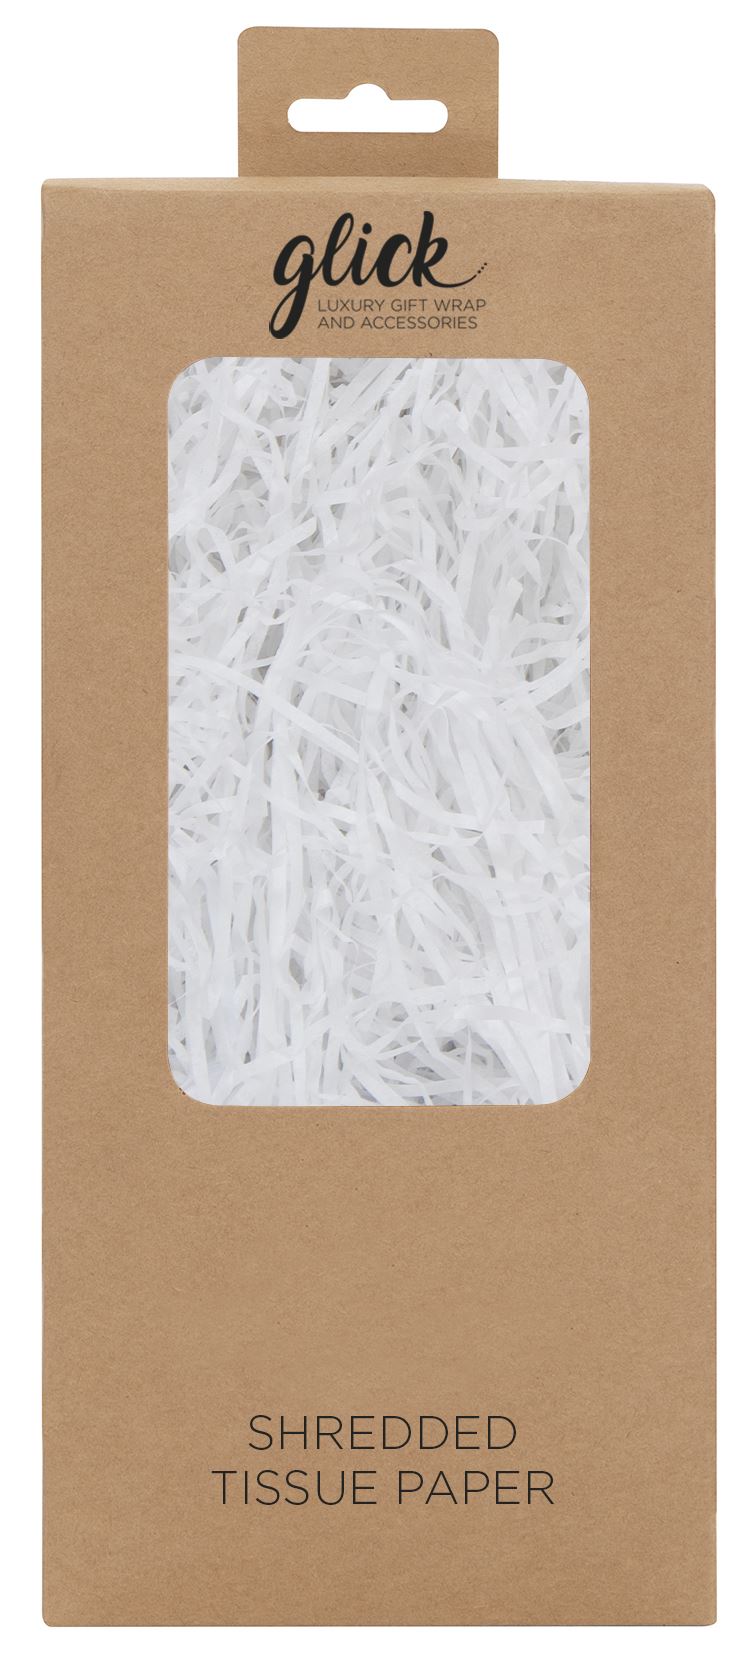 Retail packaging for white shredded tissue paper. The white paper is shown in the window of the packaging